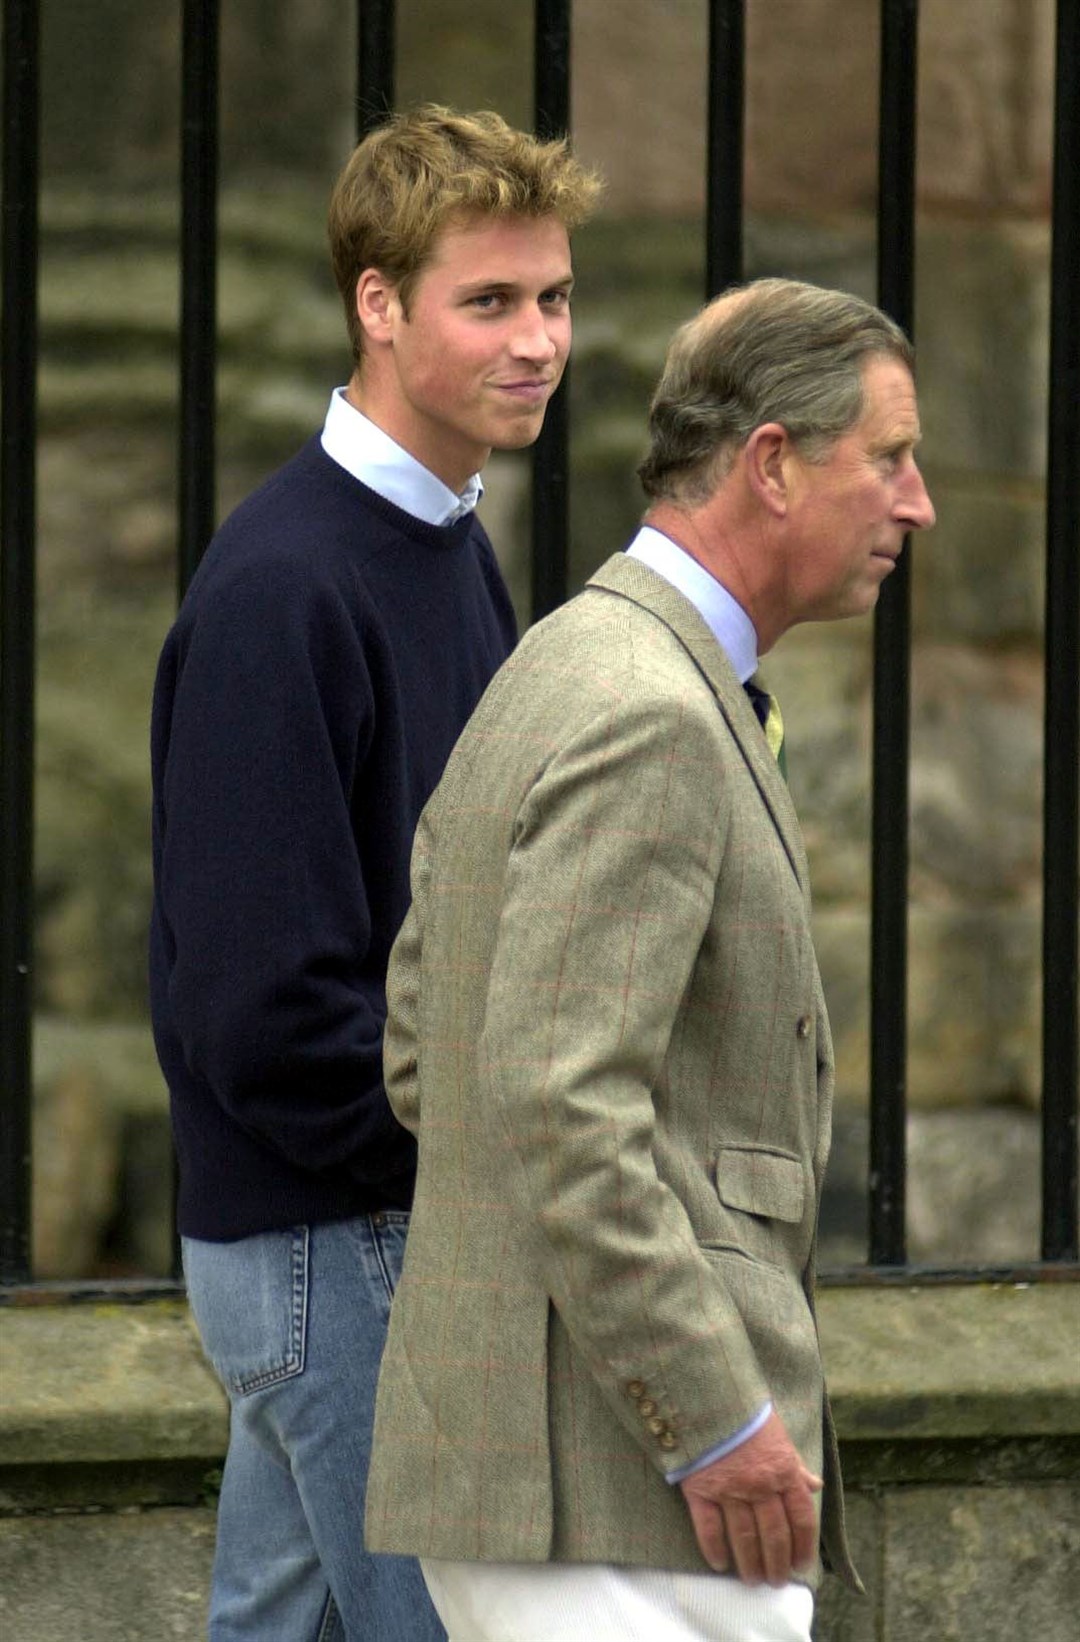 Prince William arriving at St. Andrews University accompanied by his father in 2001 (Toby Melville/PA)